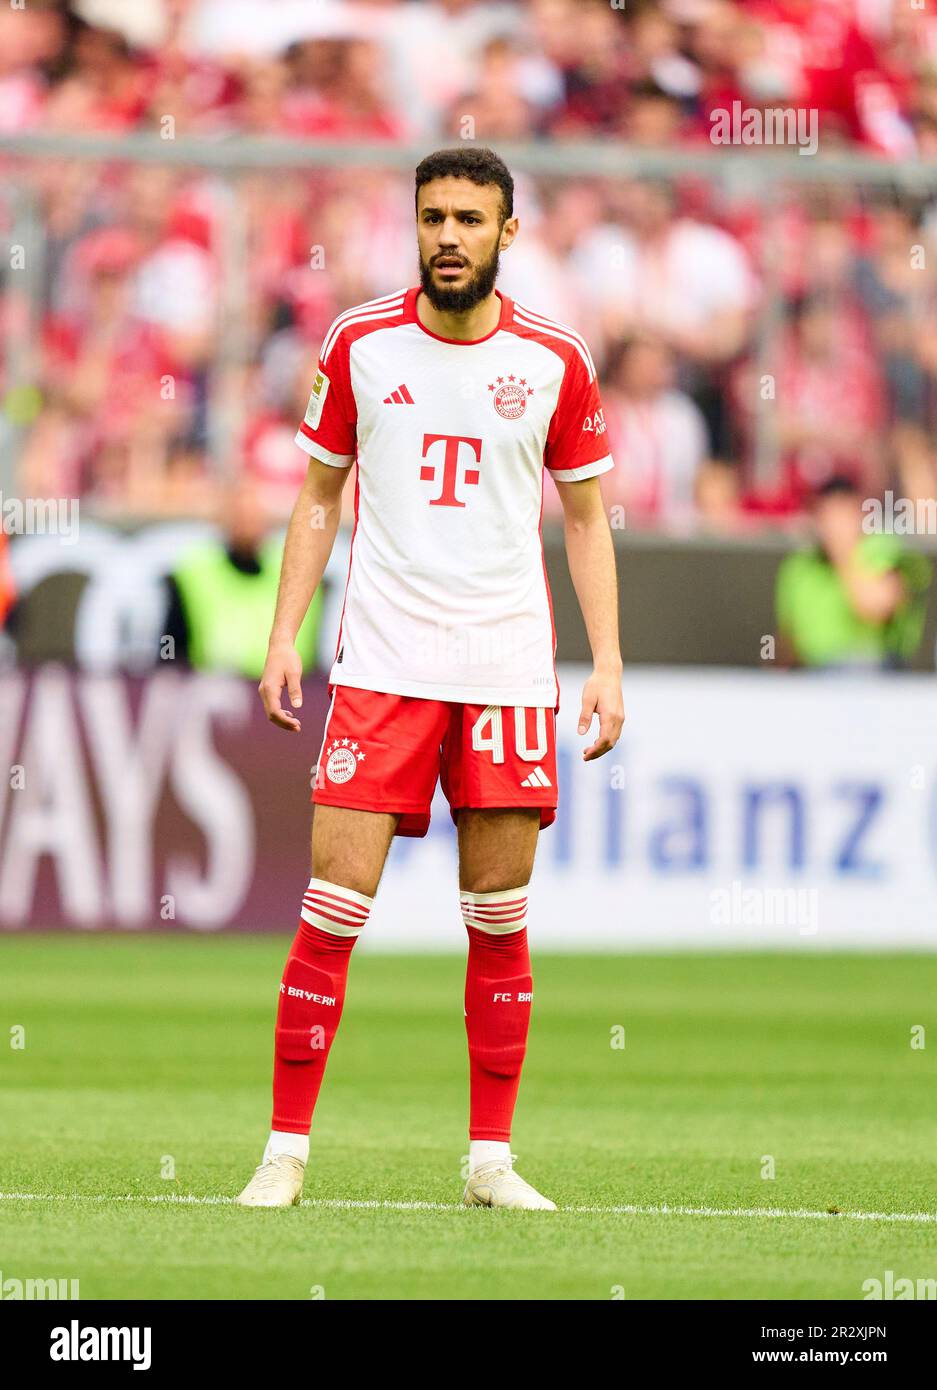 Noussair Mazraoui, FCB 40  in the match FC BAYERN MUENCHEN - RB LEIPZIG 1-3 1.German Football League on May 20, 2023 in Munich, Germany. Season 2022/2023, matchday 33, 1.Bundesliga, FCB, München, 33.Spieltag. © Peter Schatz / Alamy Live News    - DFL REGULATIONS PROHIBIT ANY USE OF PHOTOGRAPHS as IMAGE SEQUENCES and/or QUASI-VIDEO - Stock Photo